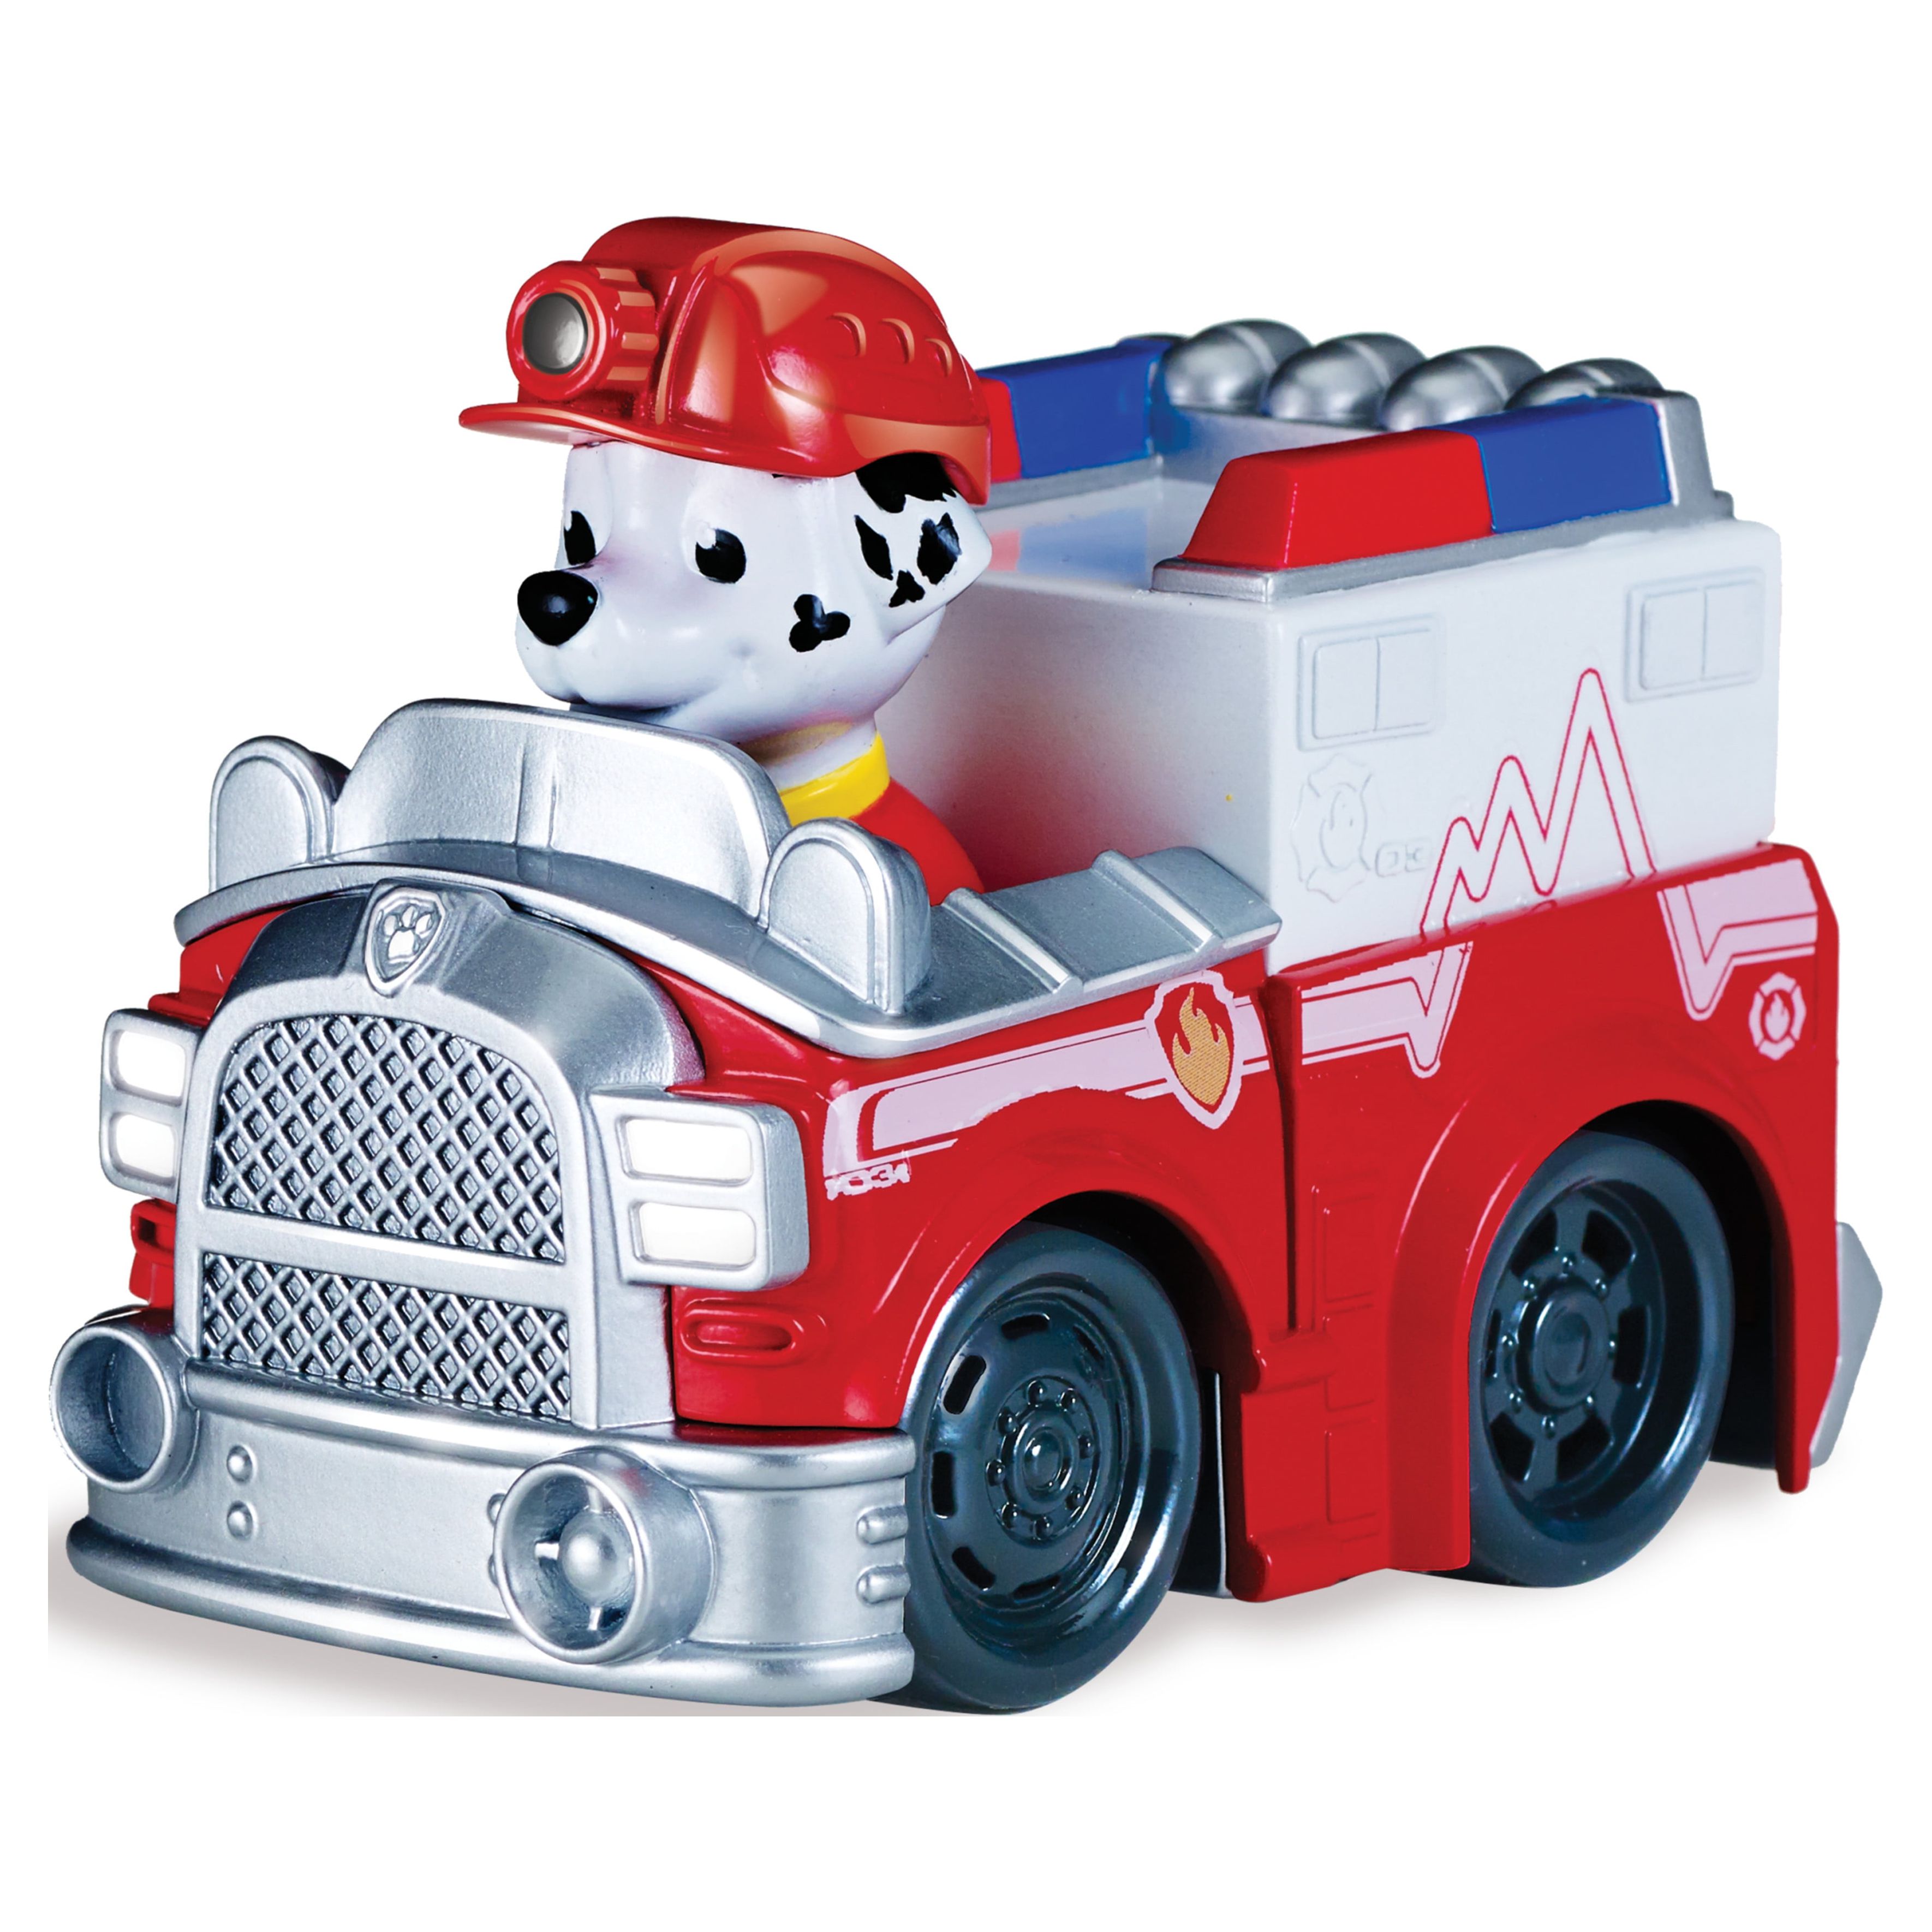 PAW Patrol Rescue Racers Vehicle and FIgure 3-Pack, For Ages - image 4 of 4